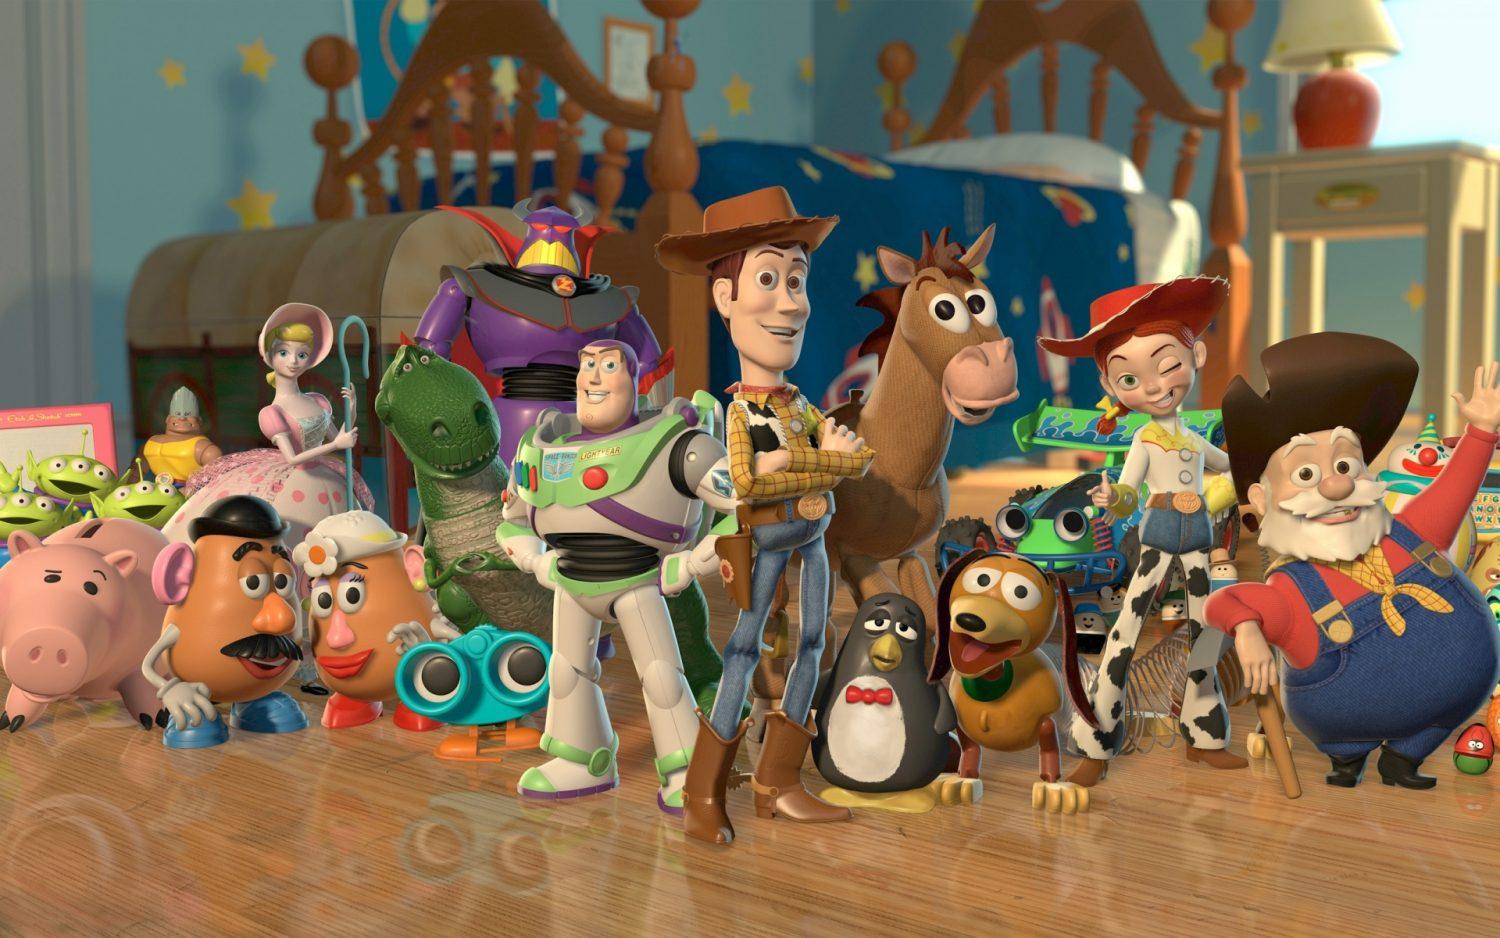 Toy Story 4 hits theaters in 2017